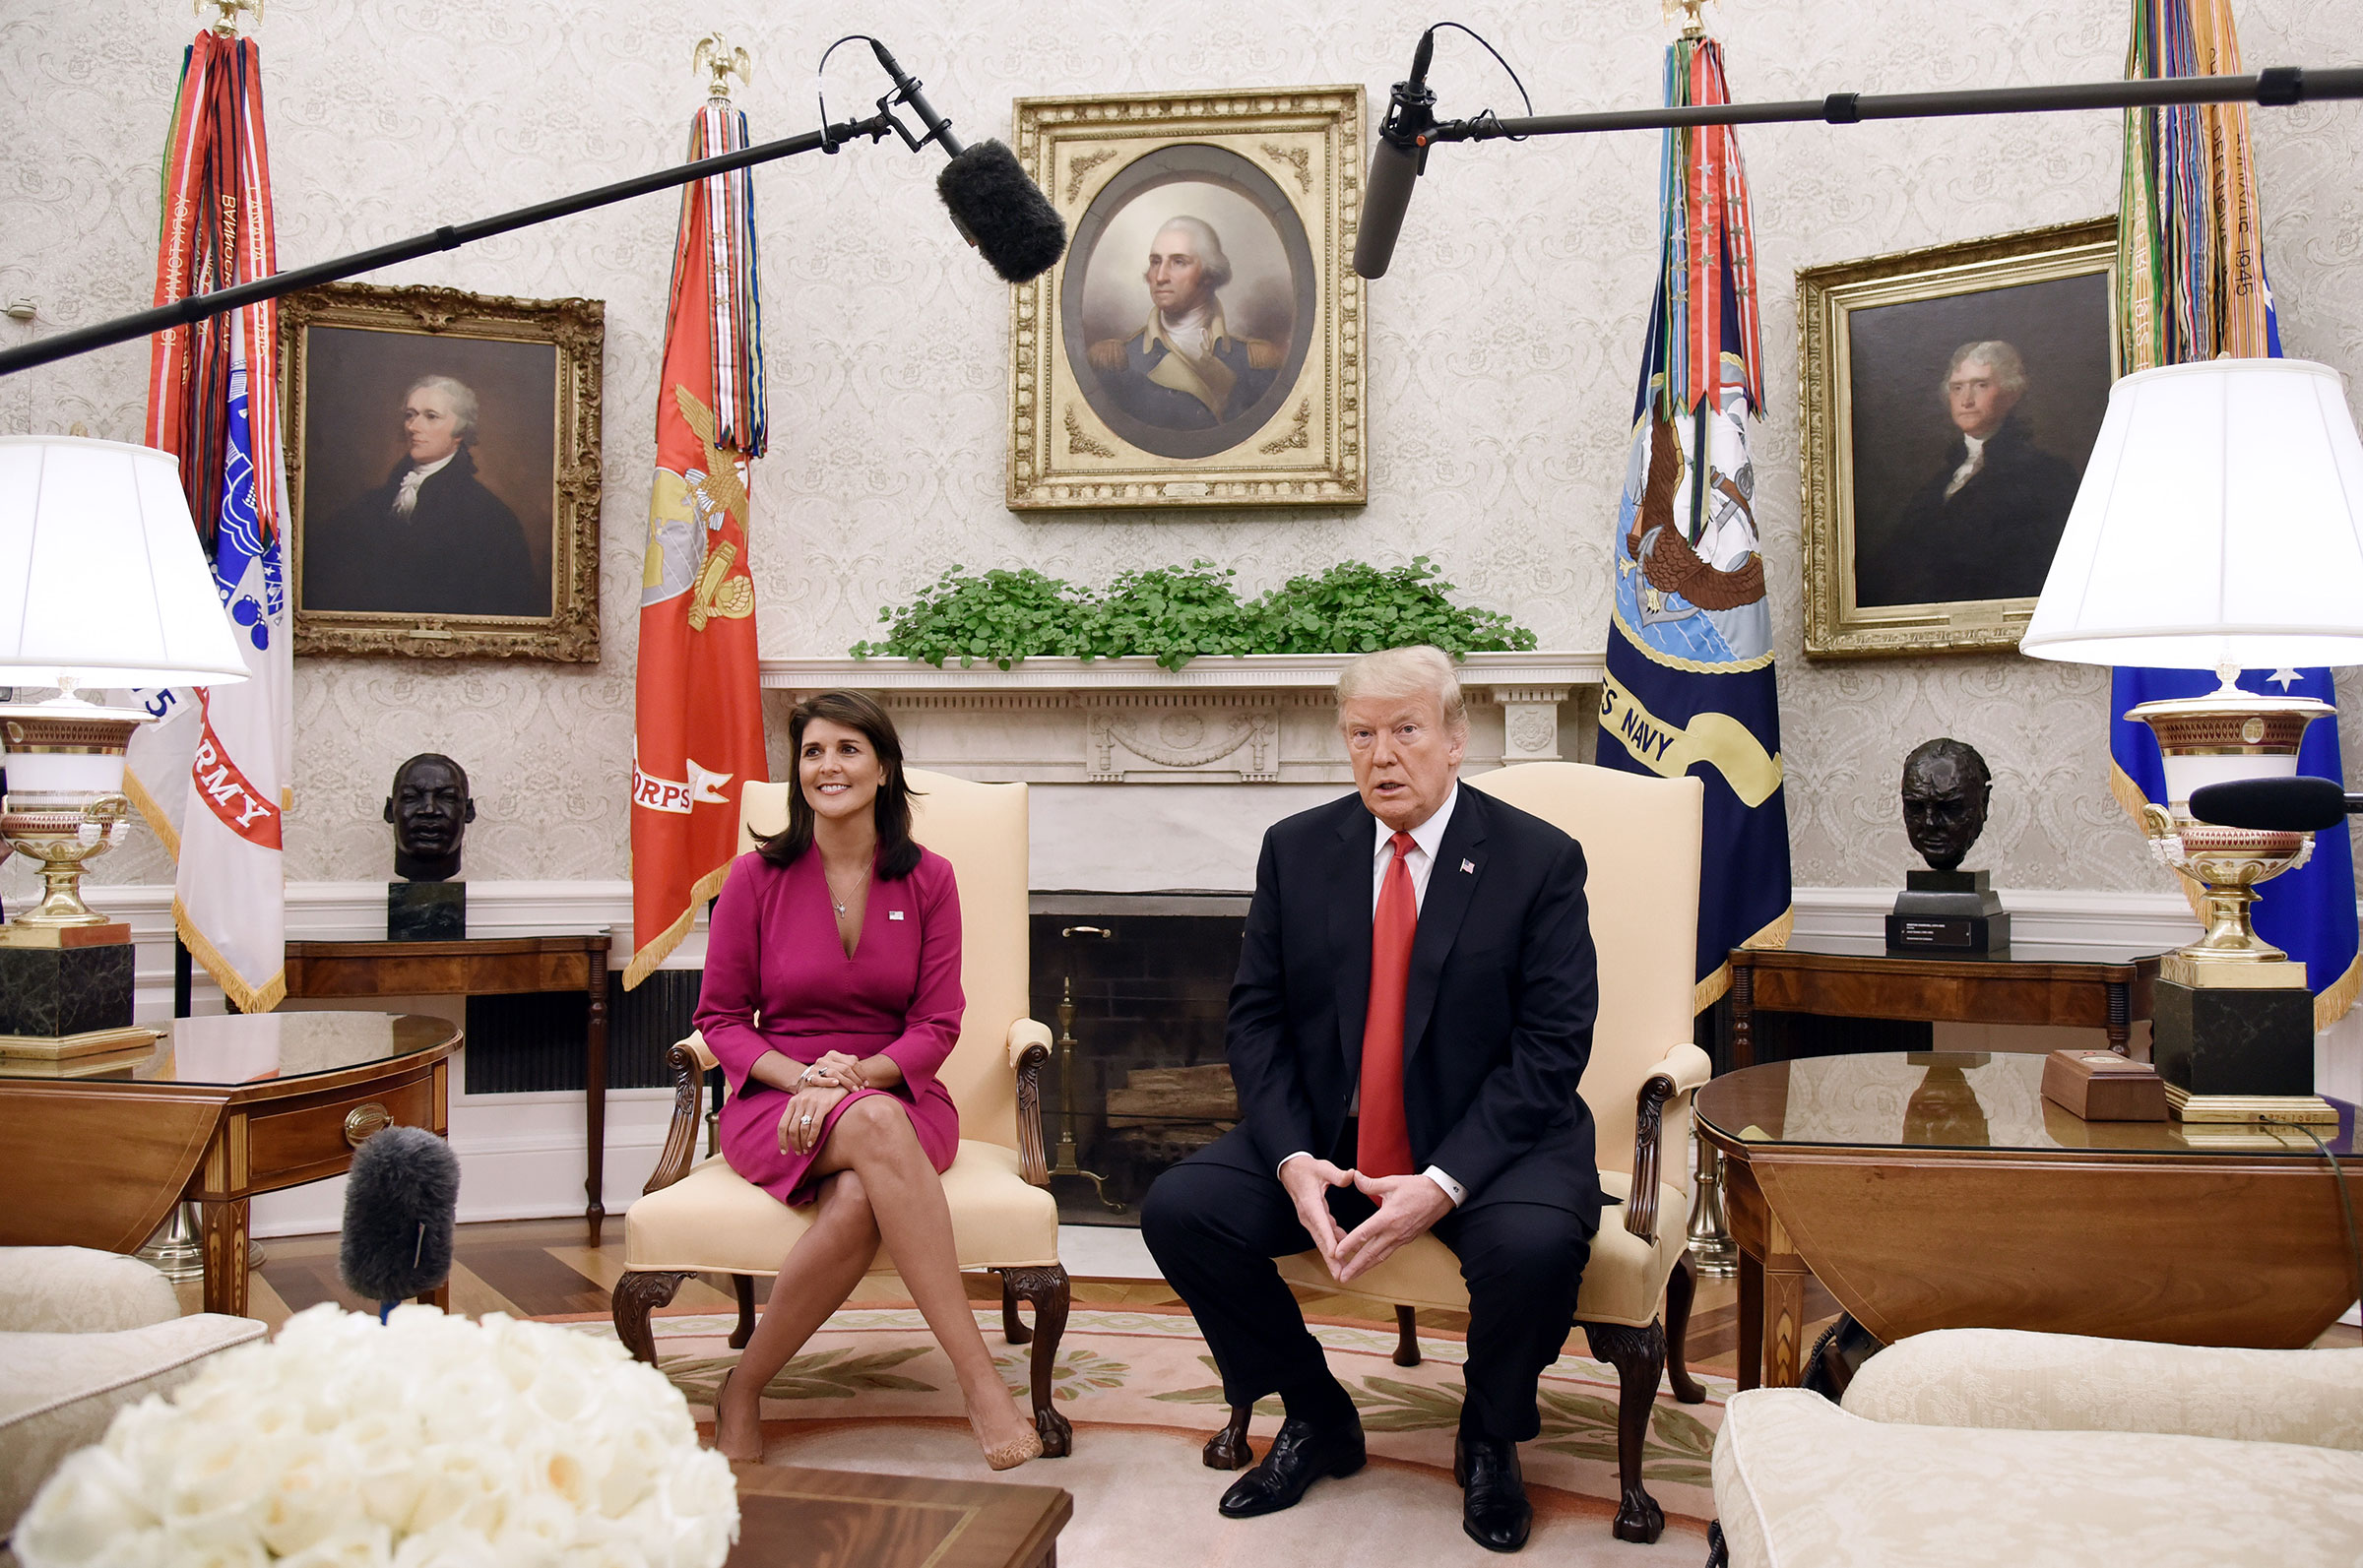 Then President Donald Trump meets with Haley, then United States Ambassador to the United Nations in the Oval office of the White House on Oct. 9, 2018 where she announced her resignation.